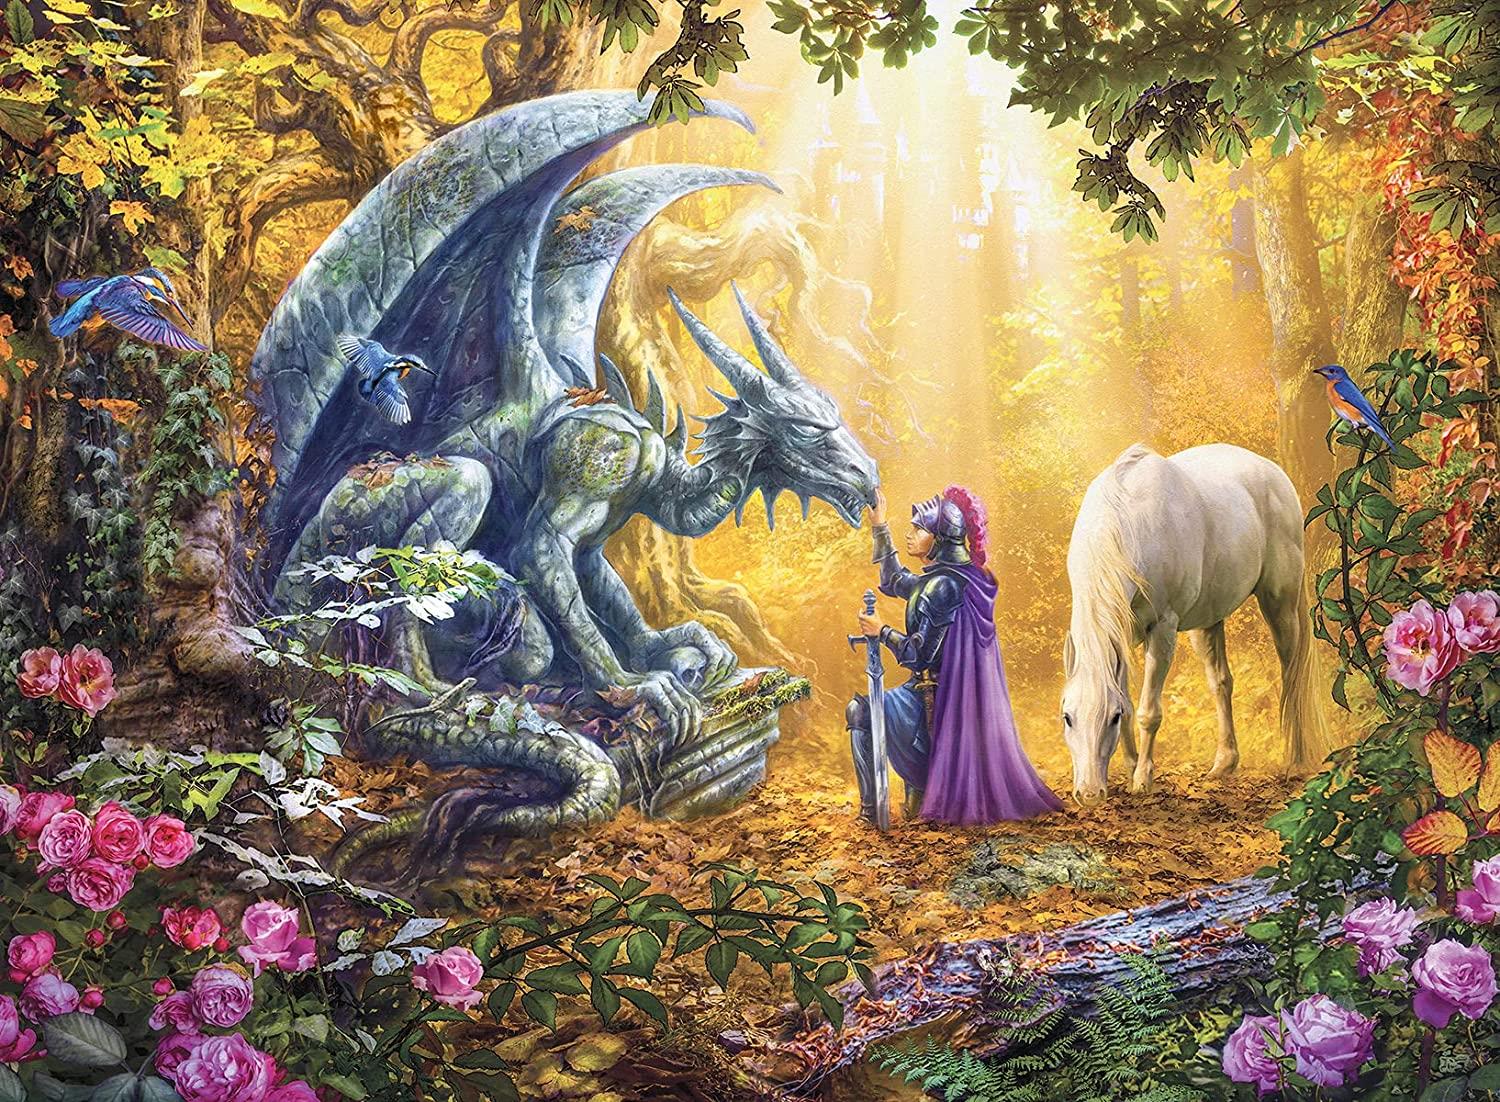 Ravensburger The Dragon's Spell Jigsaw Puzzle (500 Pieces)